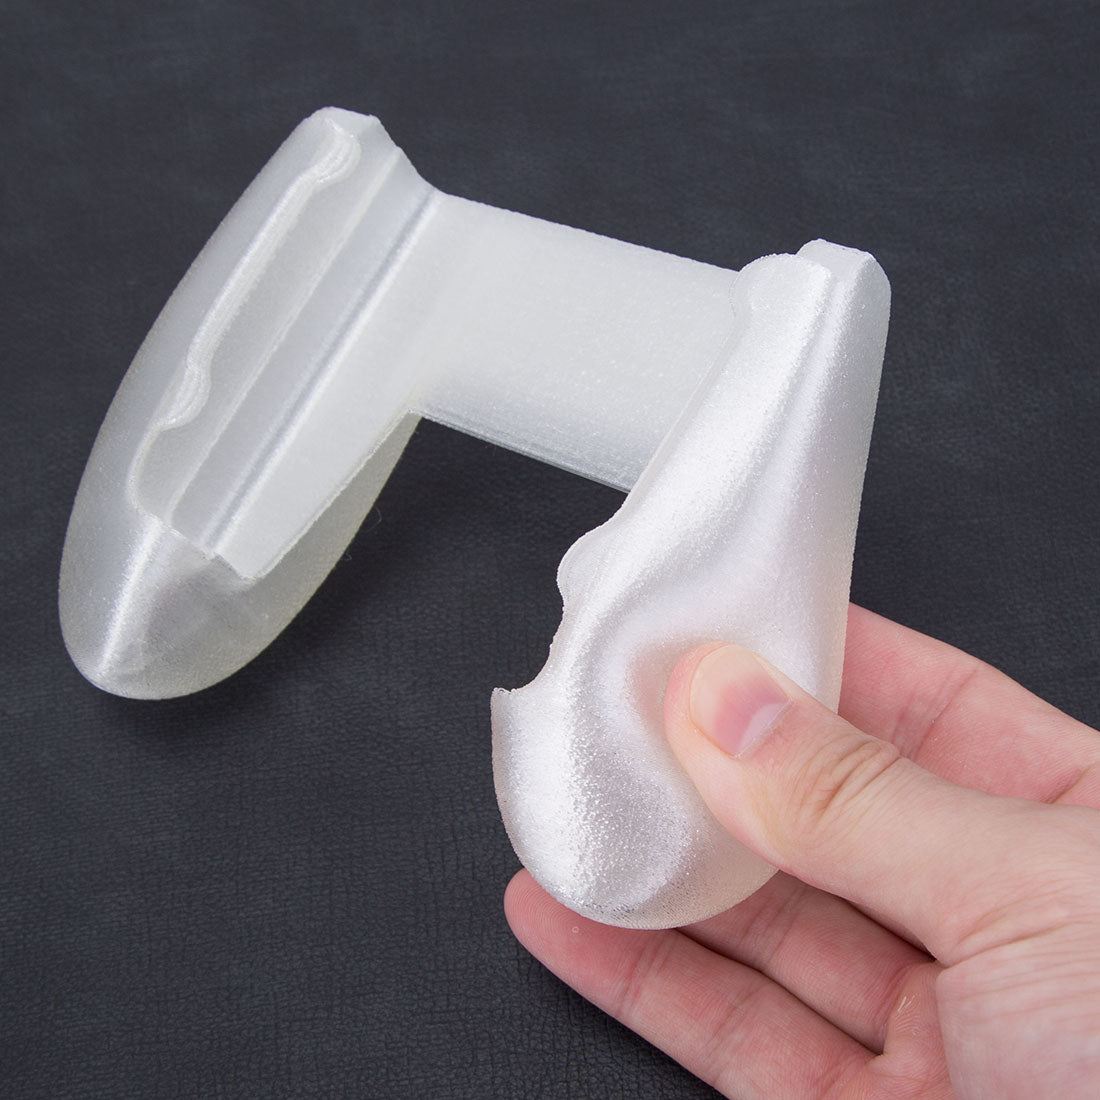 litnxt_3D_printed_flexible_handle_for_analogue_pocket_game_consoles_translucent_04